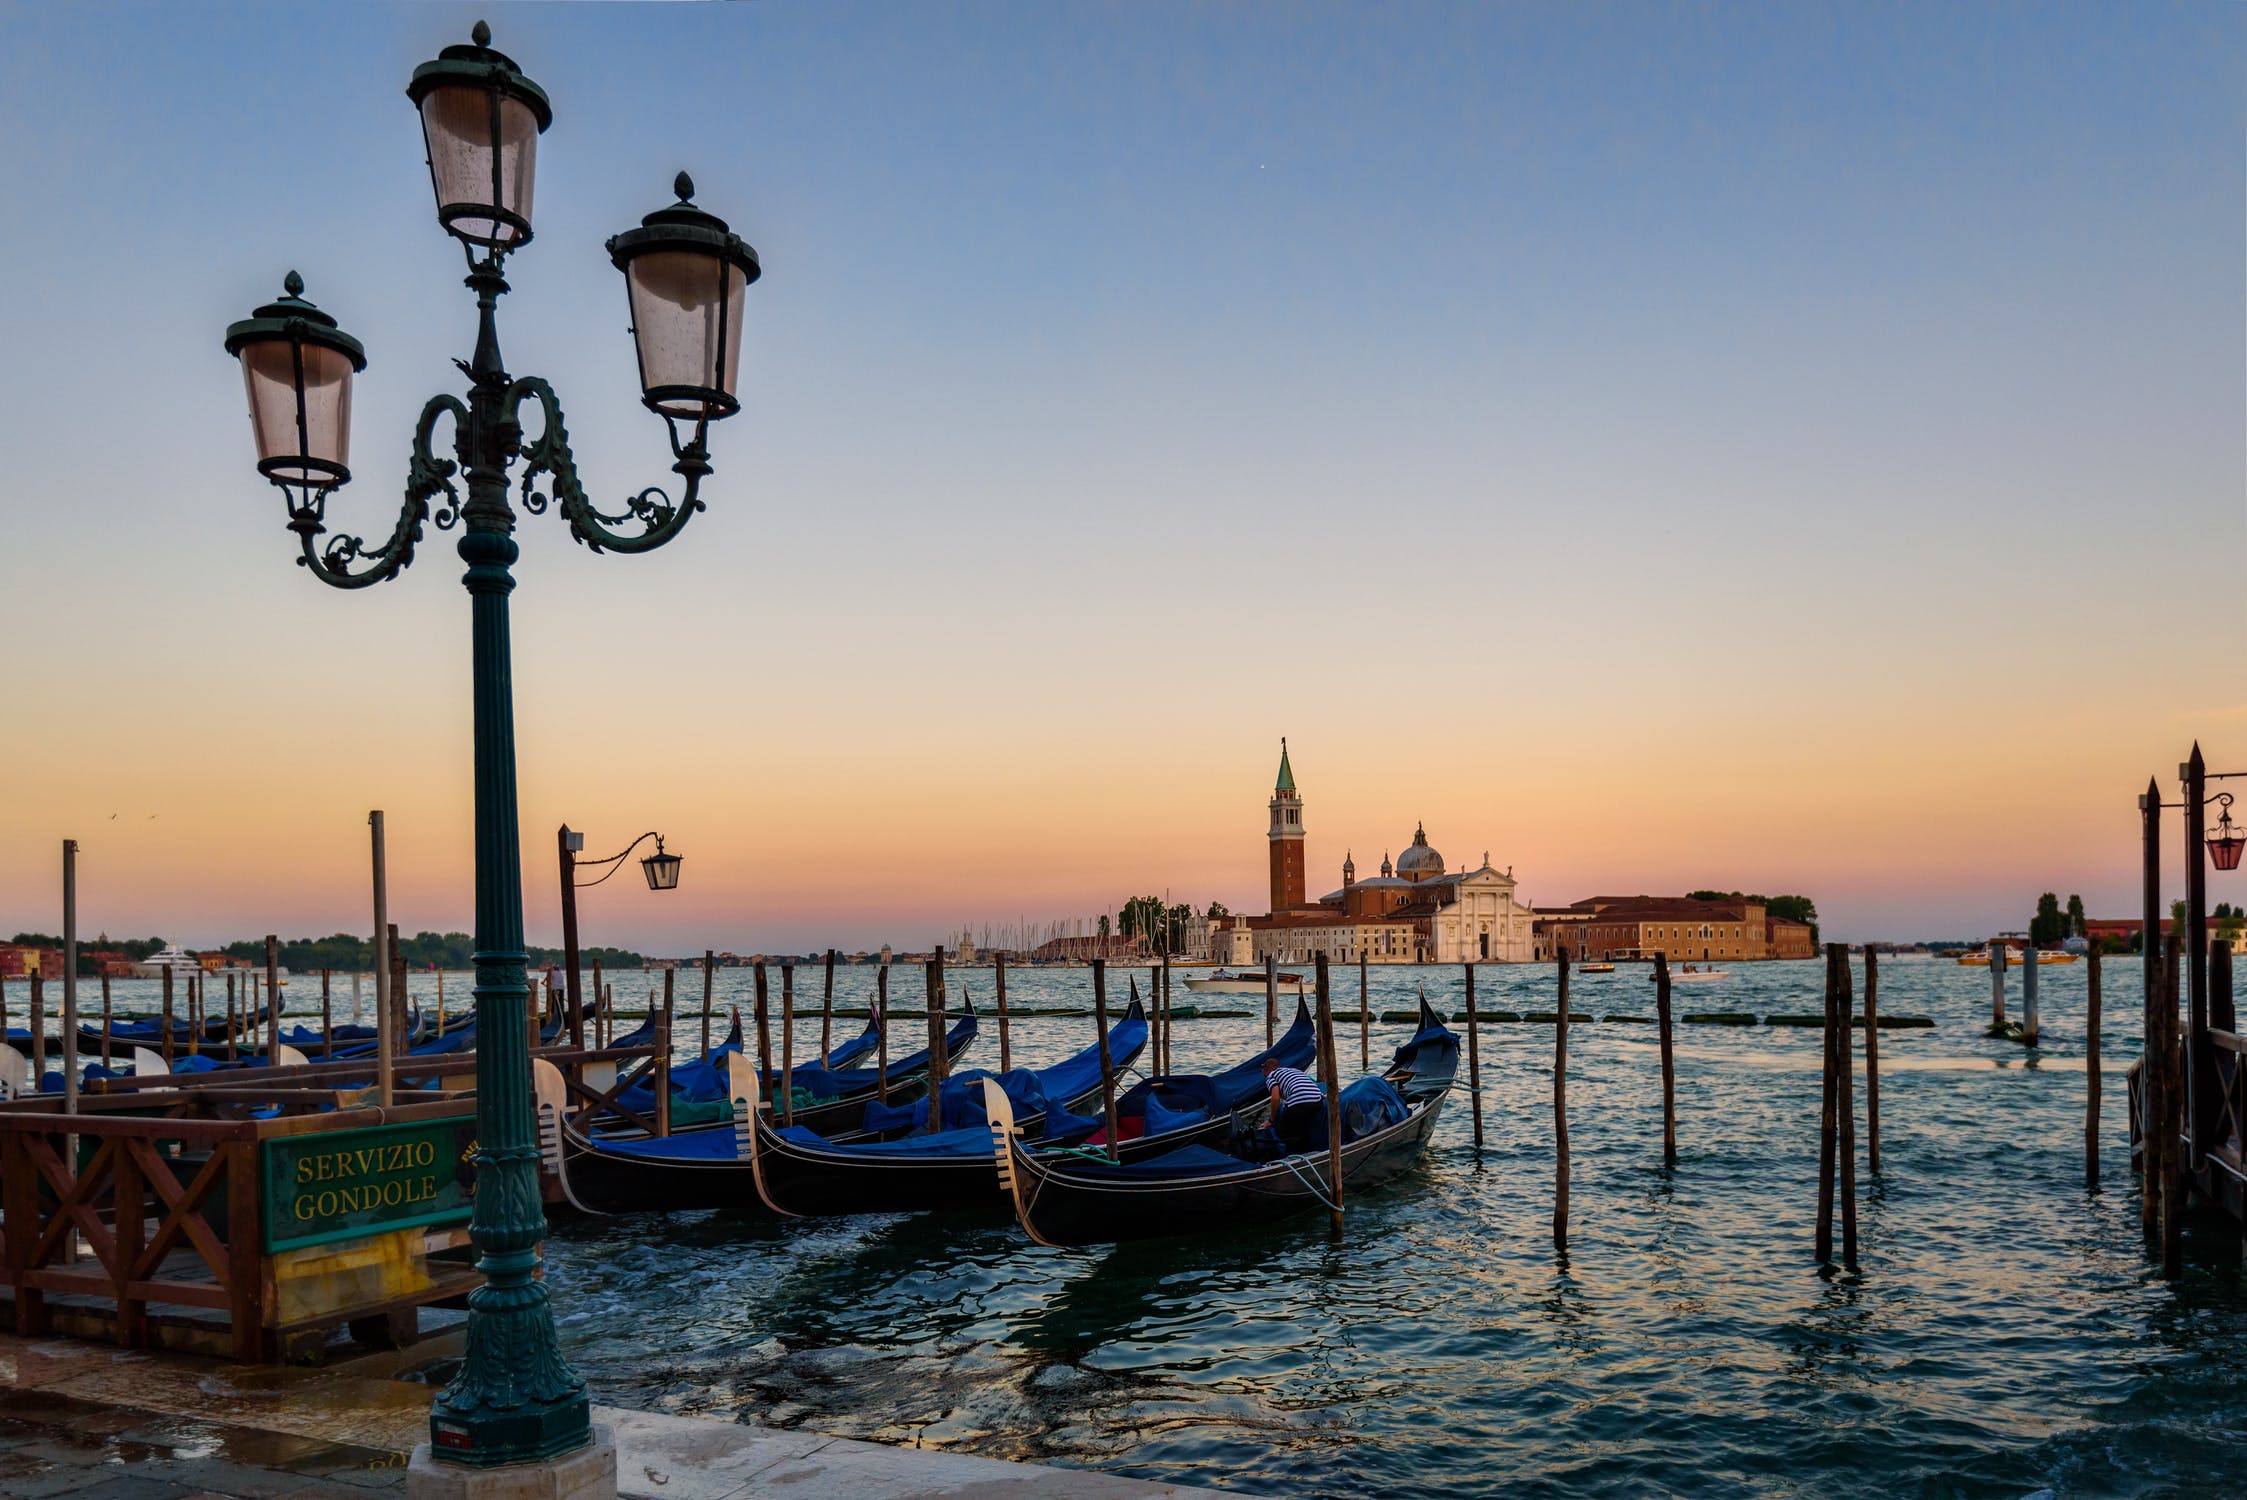 What to see in Venice in 1 day?